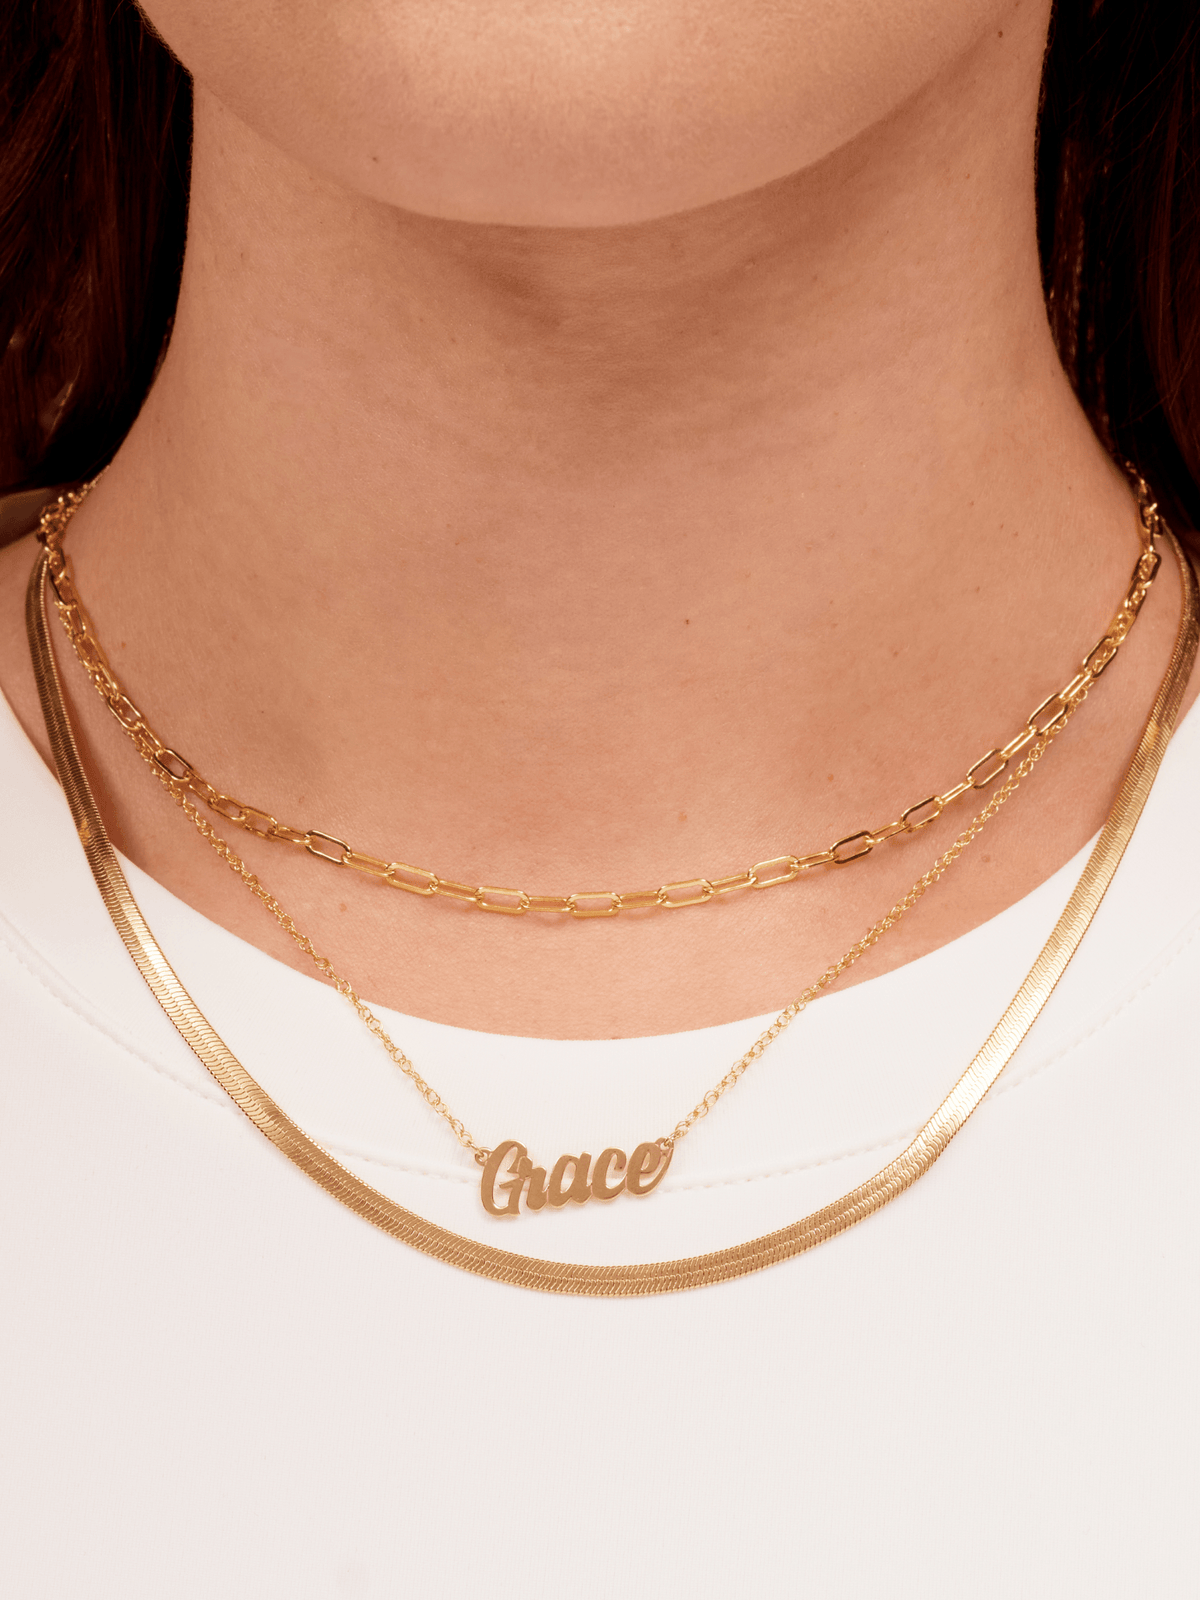 14K gold script name necklace layered with snake chain and gold paperclip chain